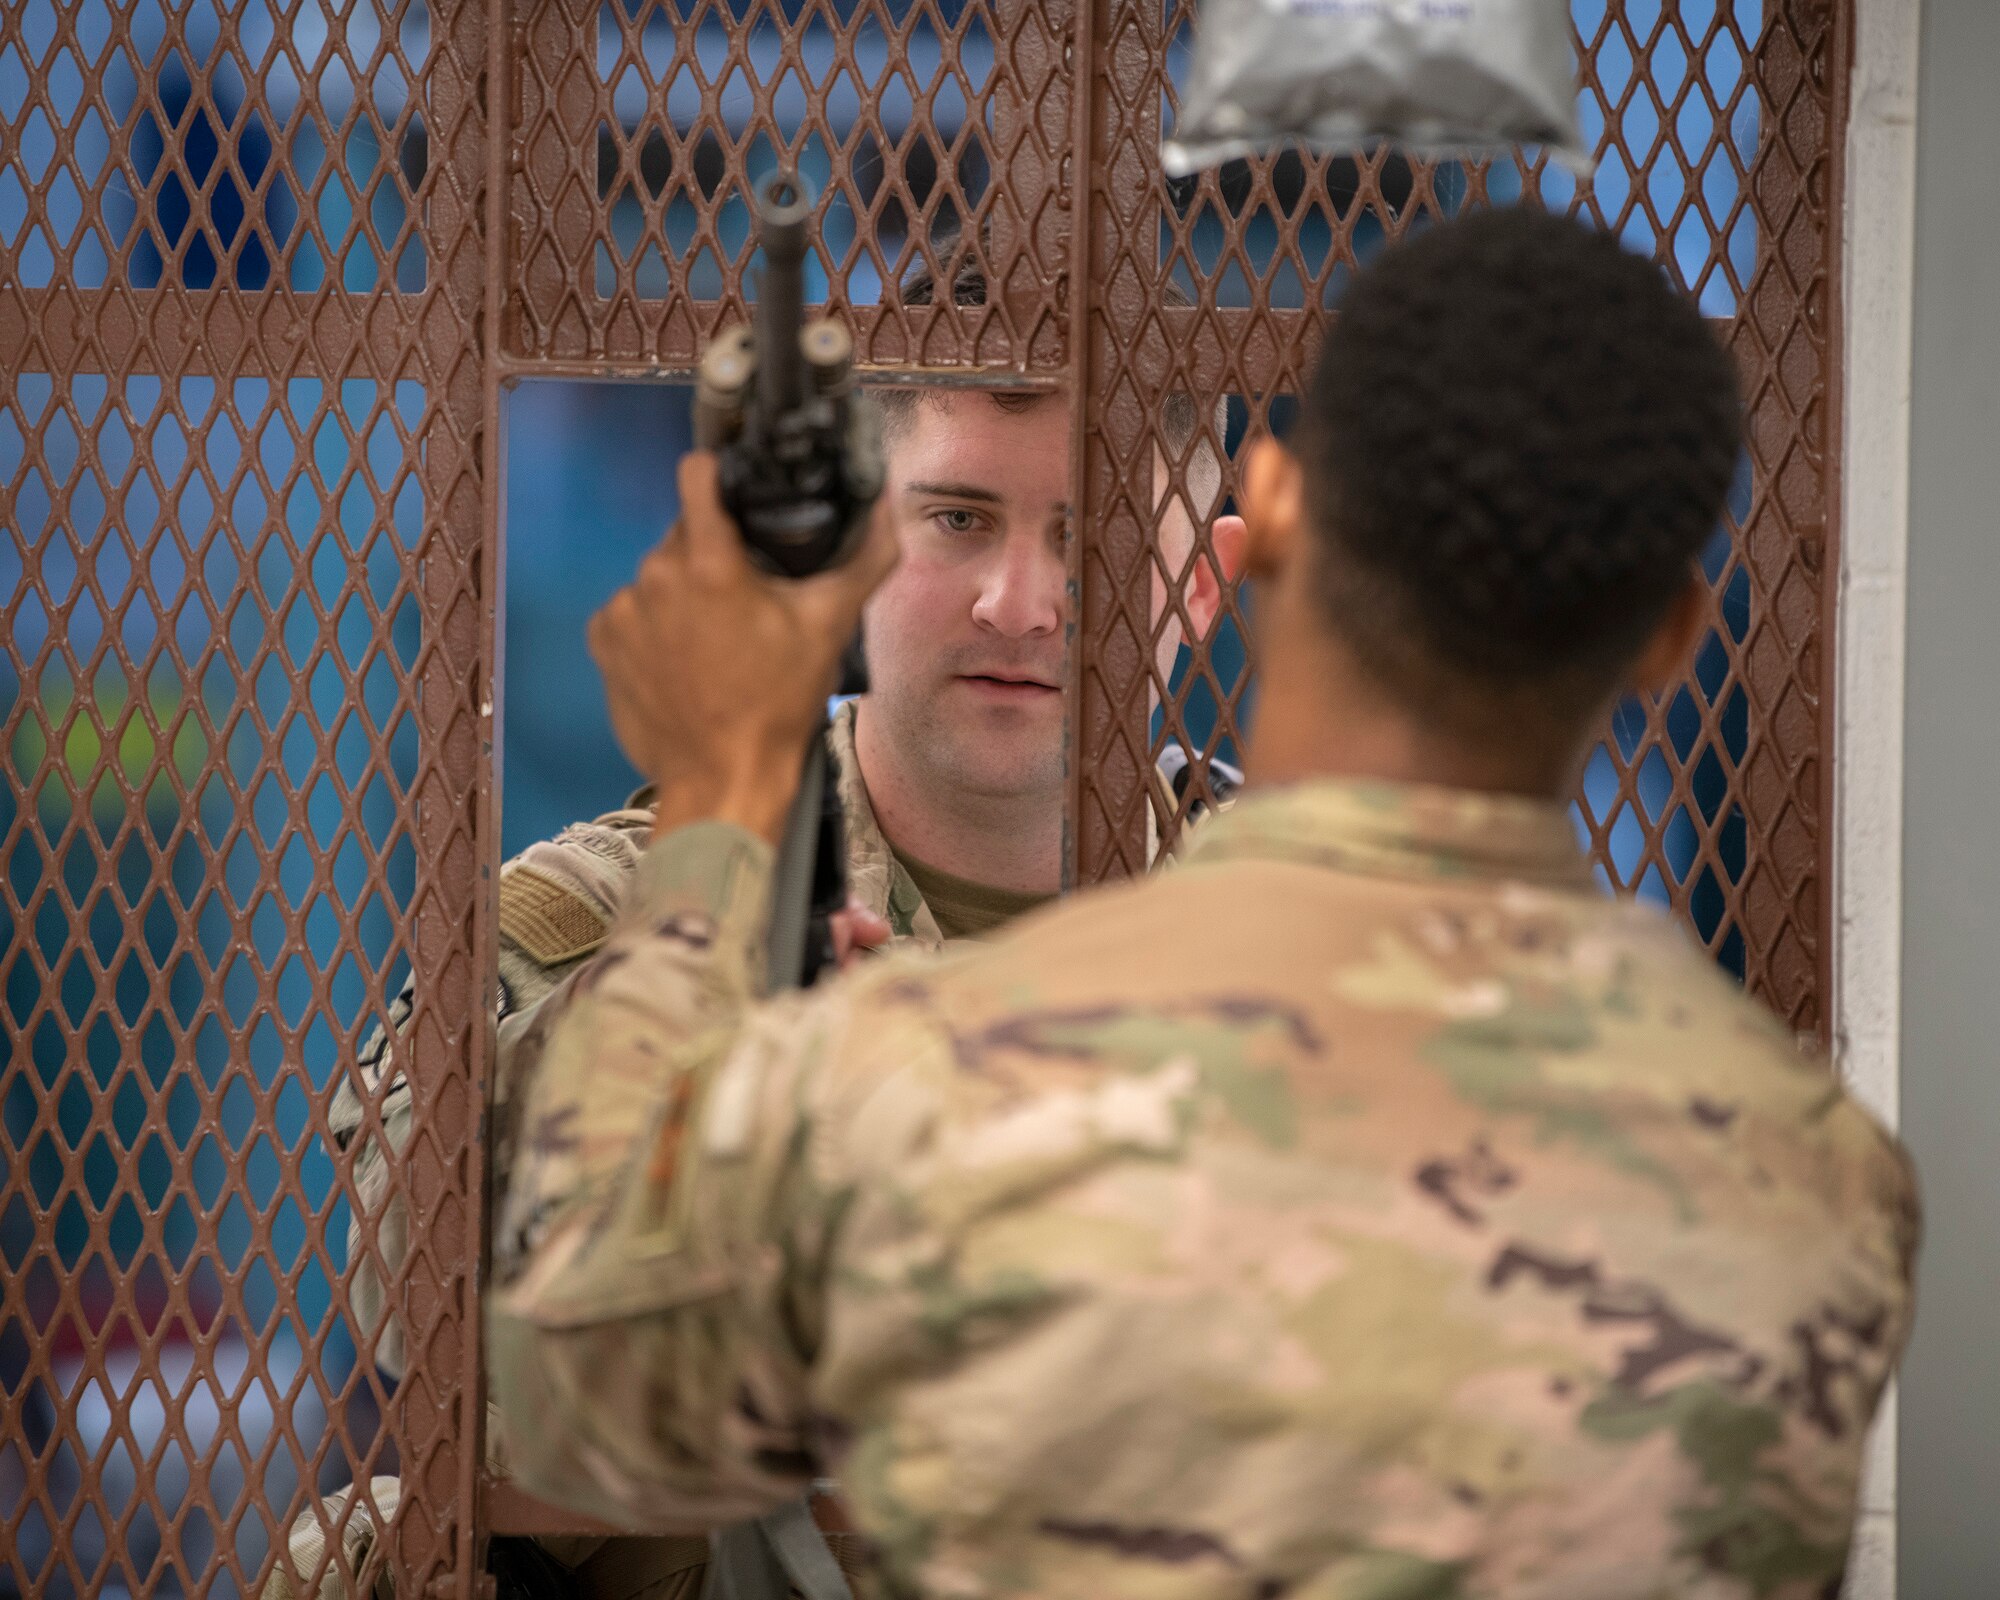 U.S. Air Force Capt. Chance Aycock, 321st Contingency Response Squadron flight commander, receives his weapon during deployment processing Sept. 14, 2019, at Travis Air Force Base, California. Contingency response forces from the U.S. and Royal Australian Air Forces staged at Travis AFB before deploying in support of exercise Mobility Guardian 2019. MG19 is Air Mobility Command’s flagship exercise for large-scale rapid global mobility operations. Forty-six U.S. aircraft will join aircraft from 29 international partners, along with more than 4,000 U.S. and international Air Force, Army, Navy and Marine Corps aviators. (U.S. Air Force photo by Louis Briscese)